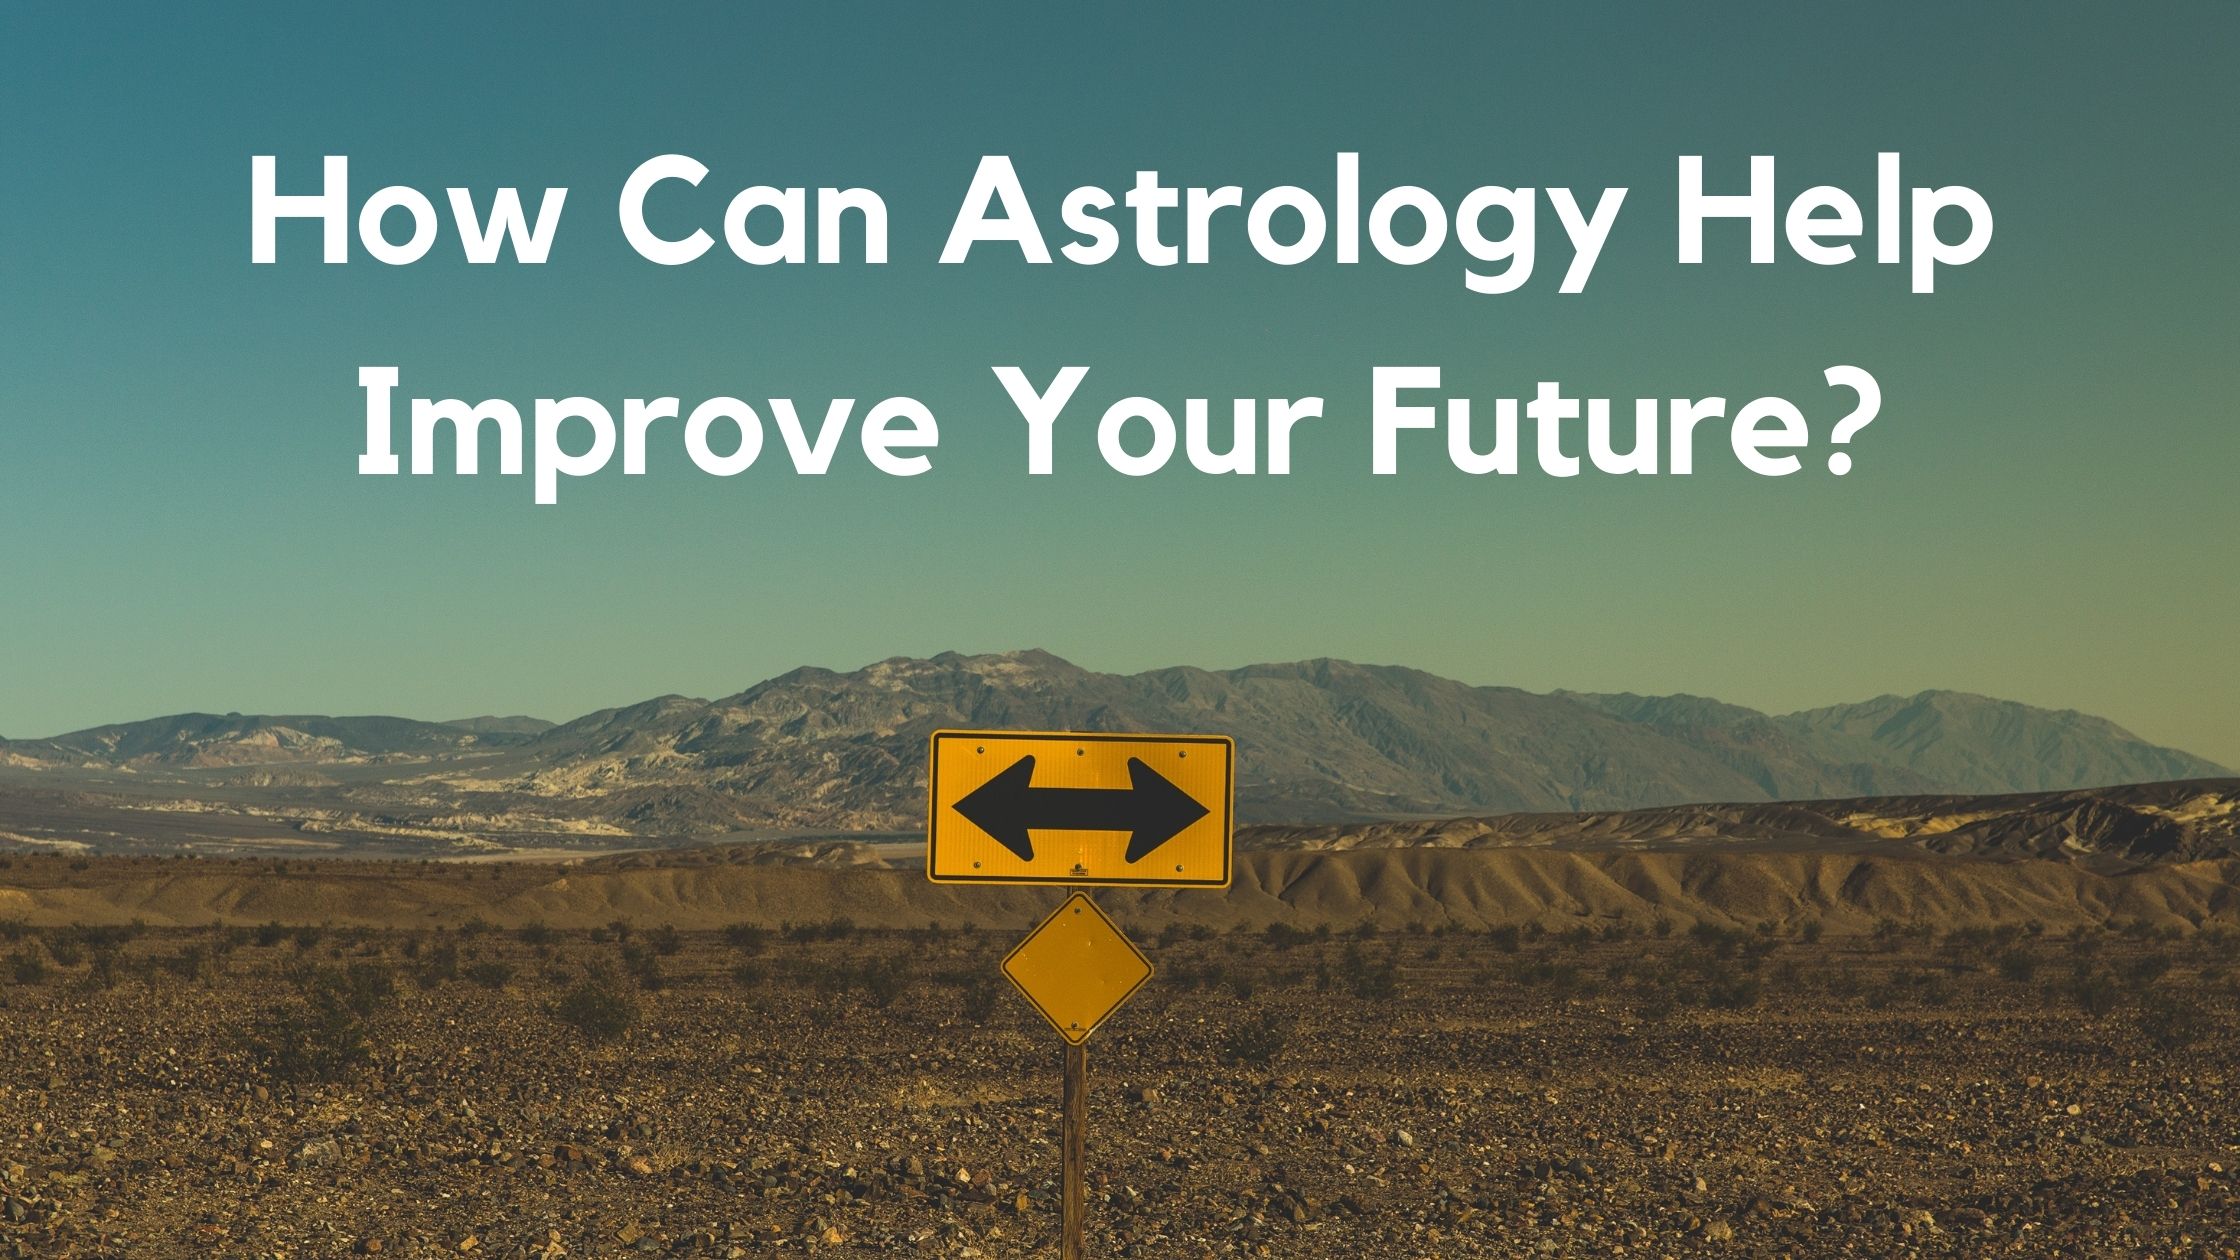 How Can Astrology Help Improve Your Future